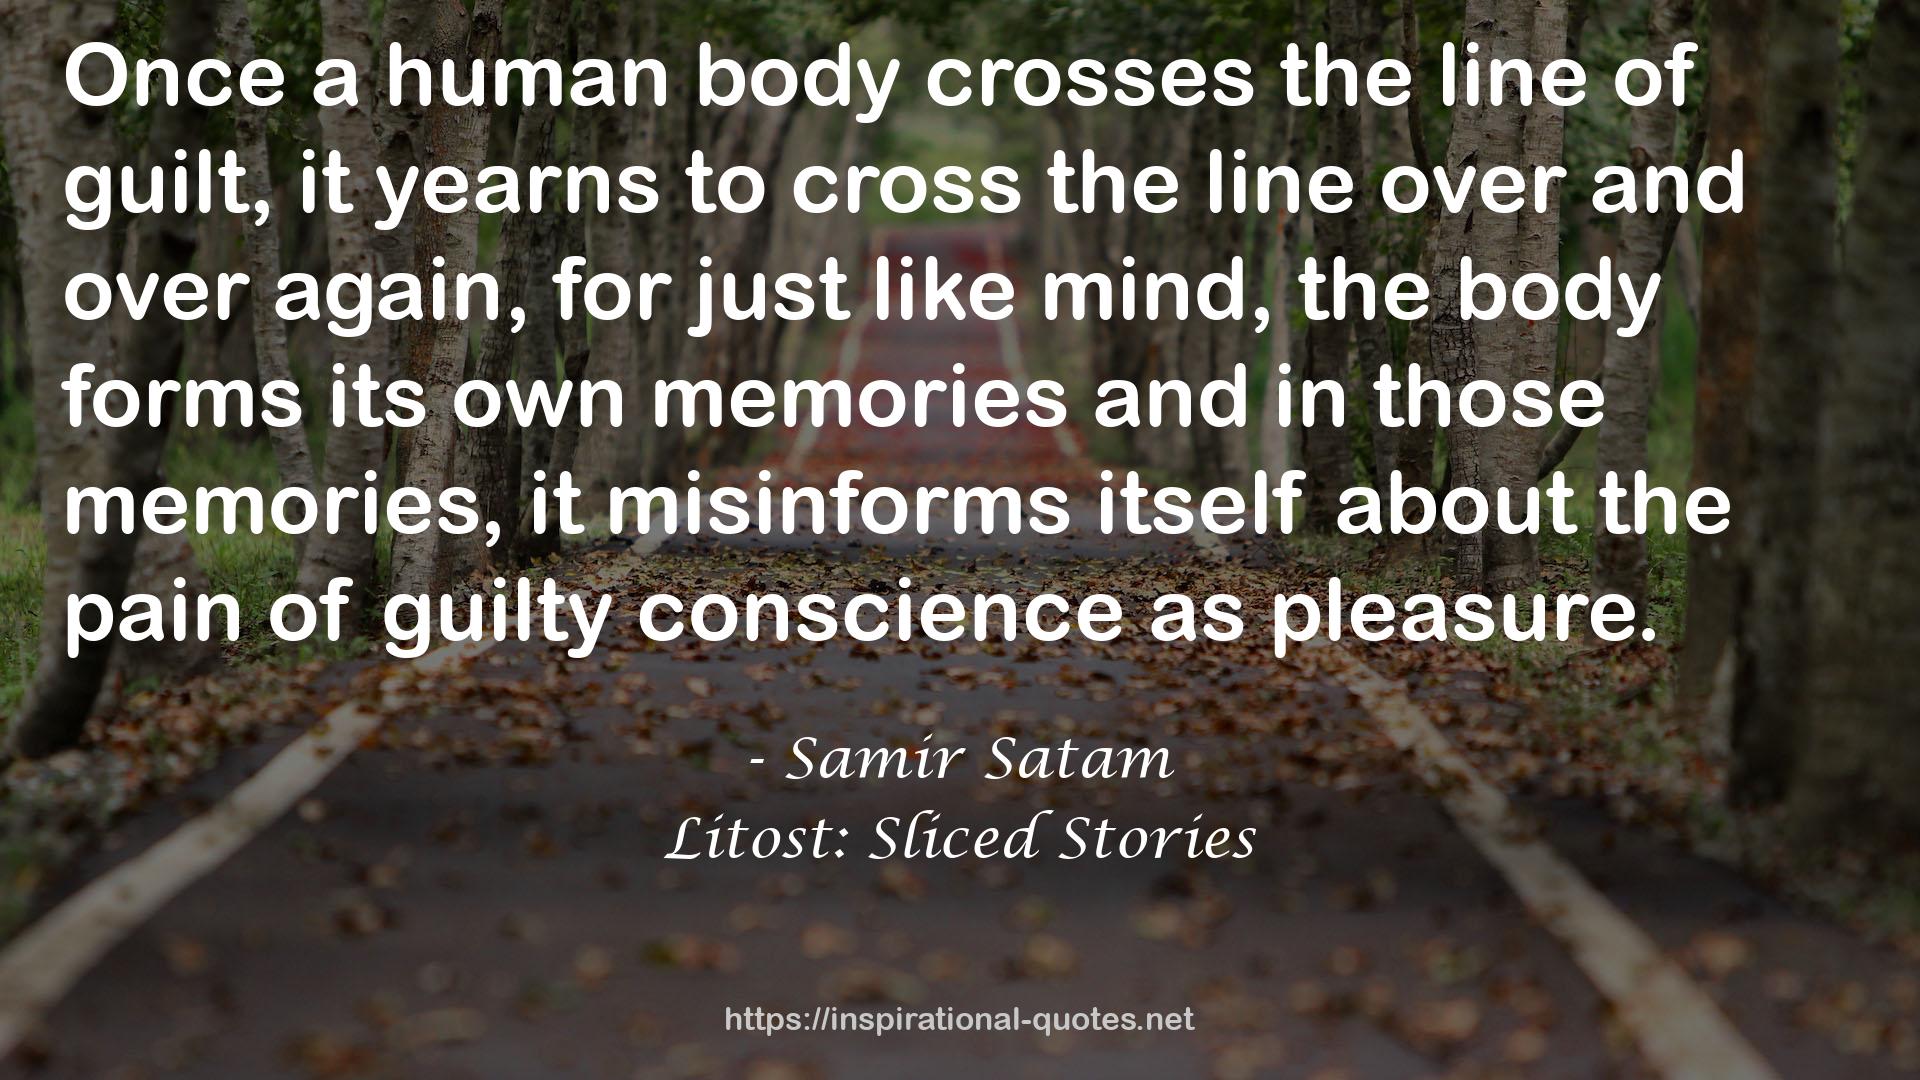 Litost: Sliced Stories QUOTES